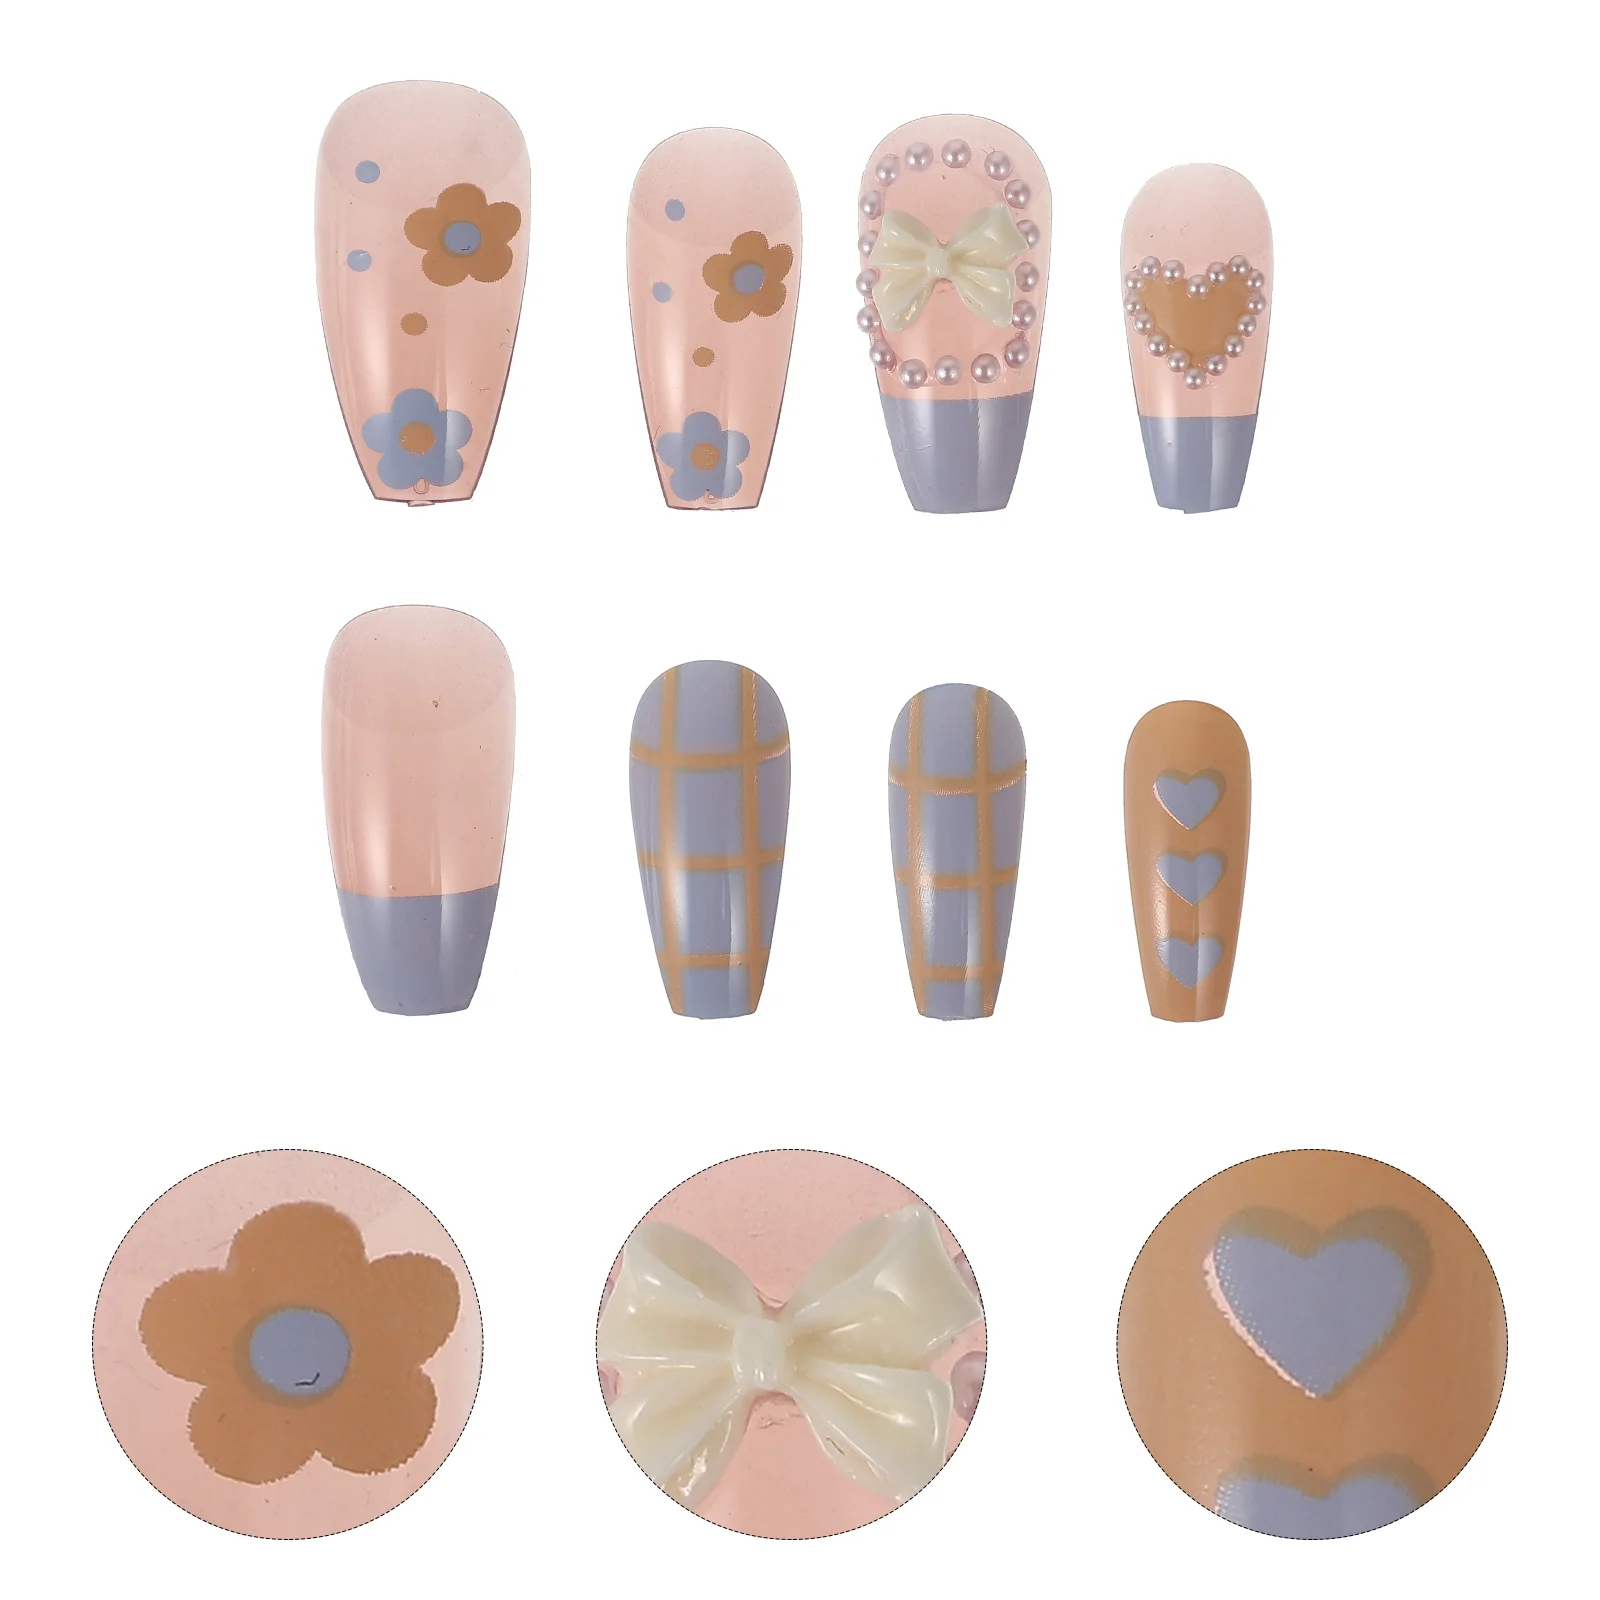 

Nails Nail Fake Acrylic False Tips Diy Plaid Artificial Patches Decor Manicure Tape Adhesive Ballet Cover Full Press on nails